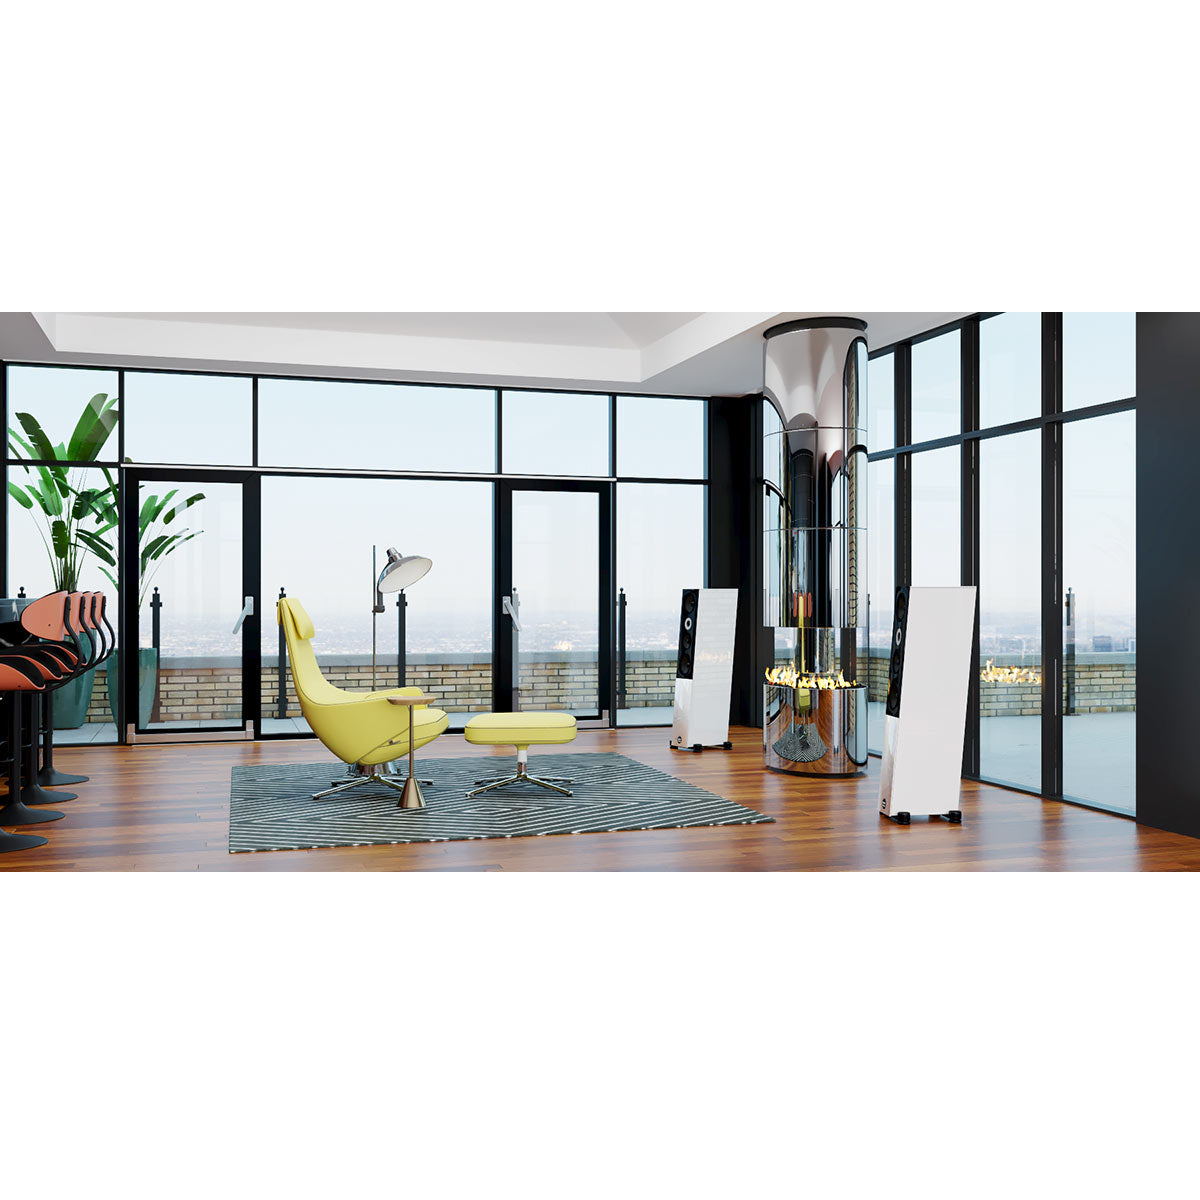 Audio Physic MIDEX Floor Standing Speakers (Made in Germany)